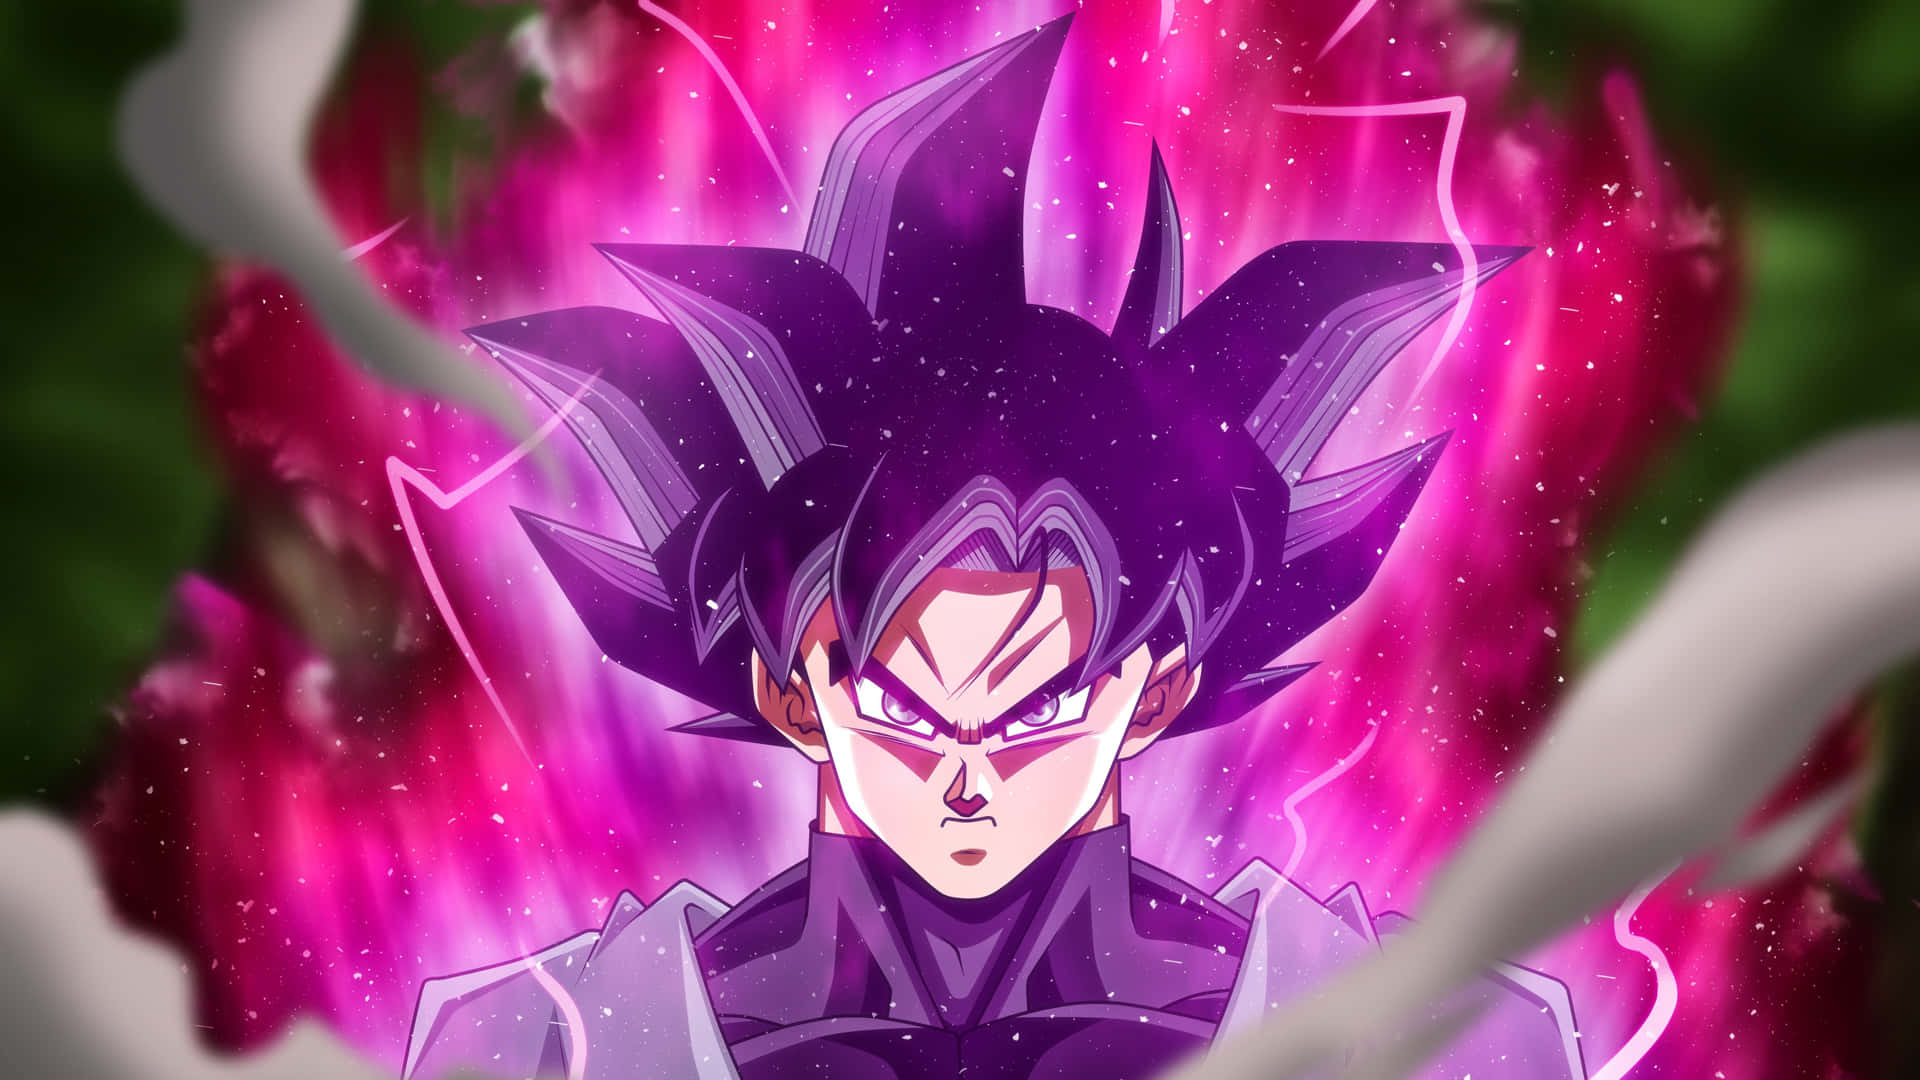 Get Ready to Go Super Saiyan on Your PC. Wallpaper